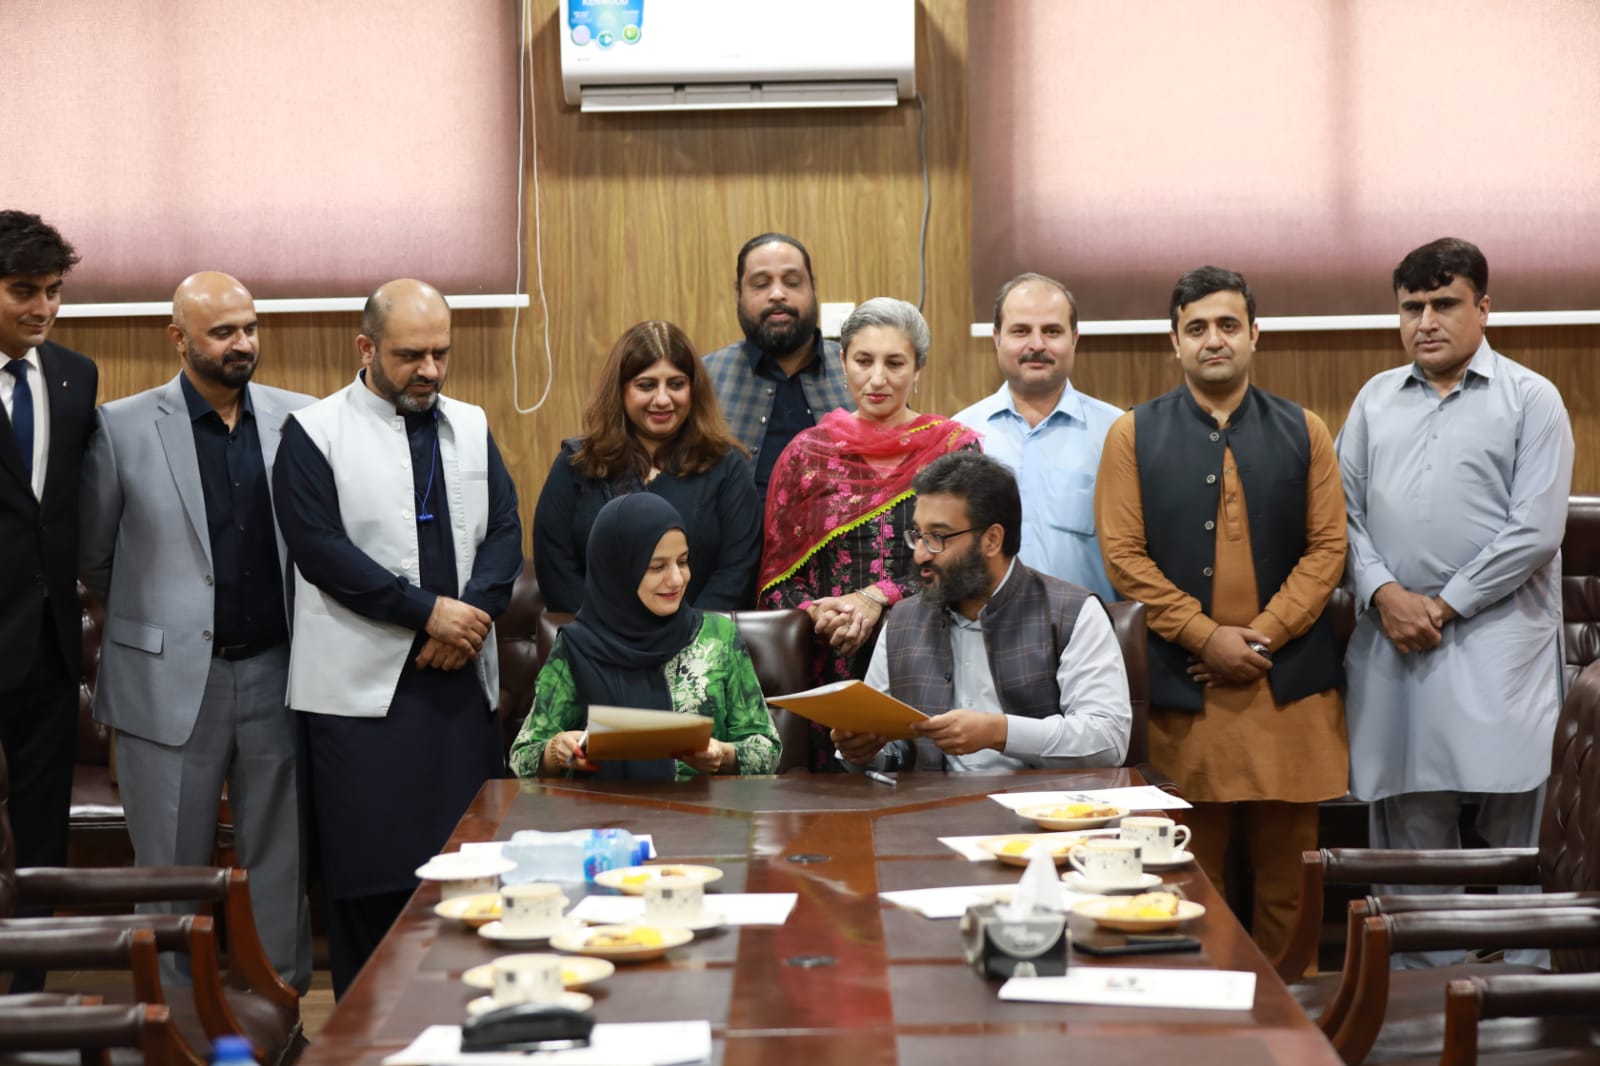 School of Law at QAU Joins Forces with Tadveen Project of Mantaq Center for Research